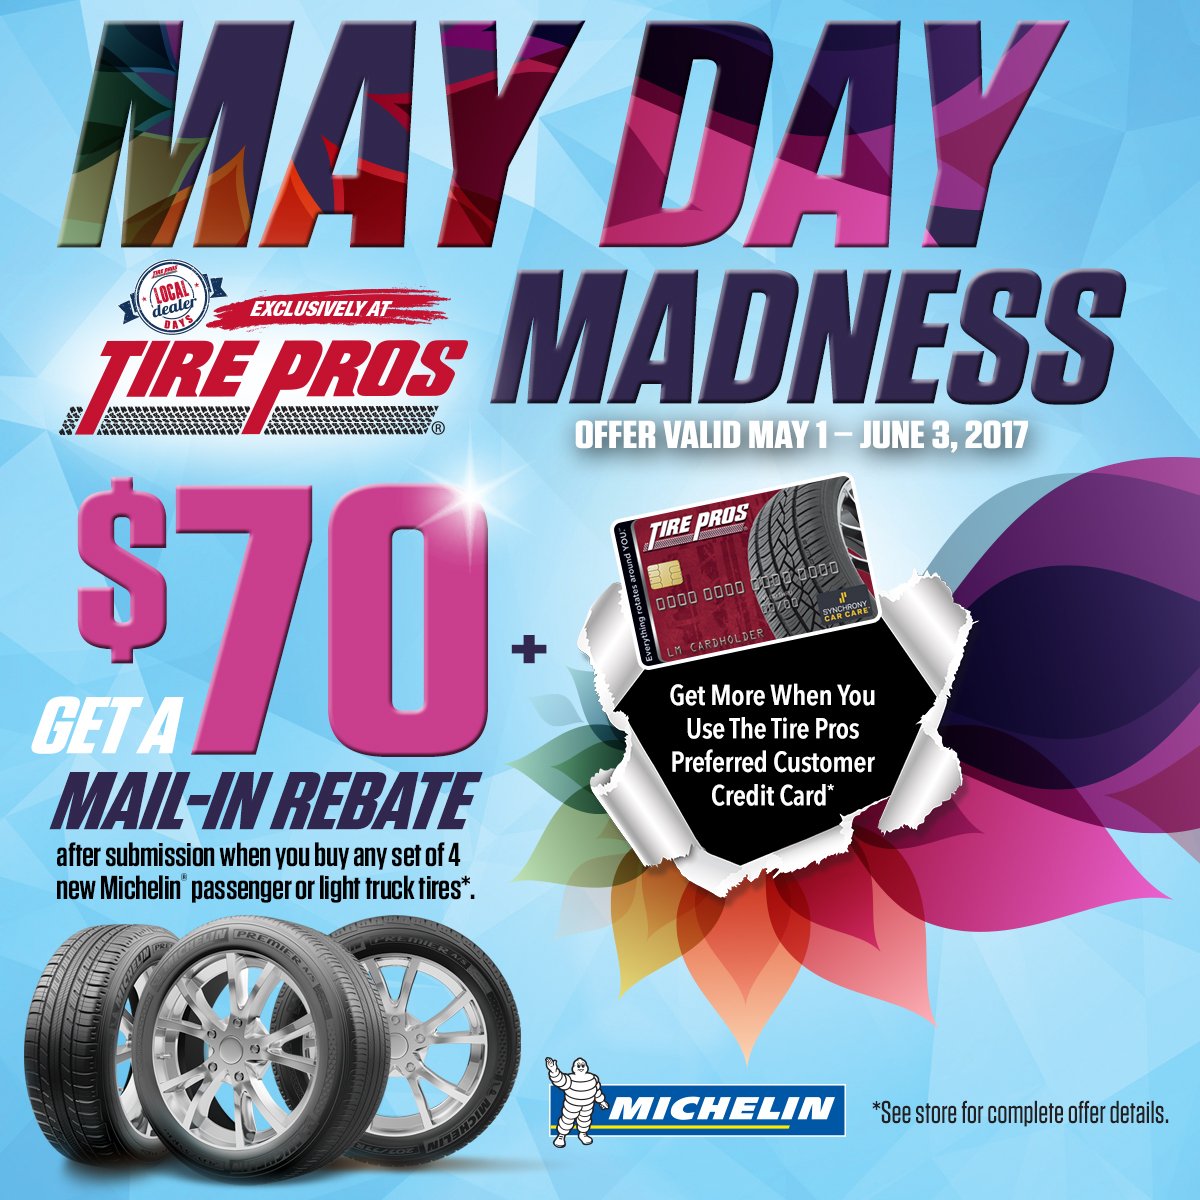 This promotion is ONLY valid at your local Tire Pros dealer so hurry in TODAY! #tirepros #mayday #madness #michelintire